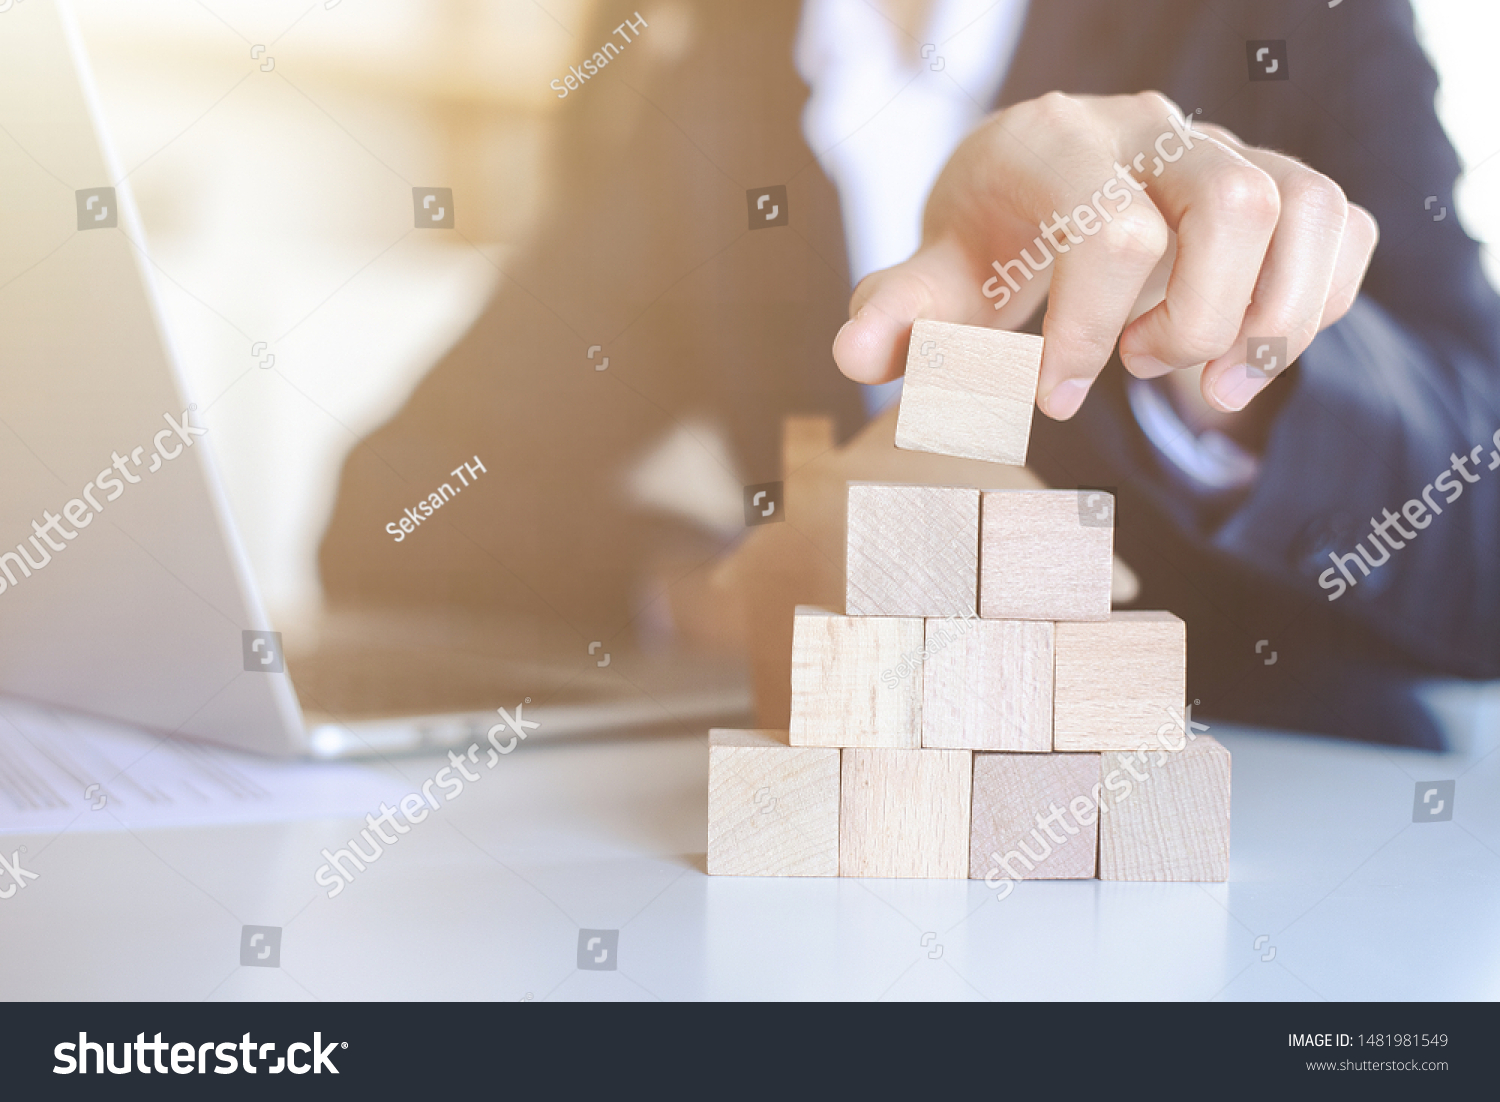 Closeup picture of a businessman placing wooden blocks to represent the peak of the boom to grow their business goals, financial statistics.
 #1481981549